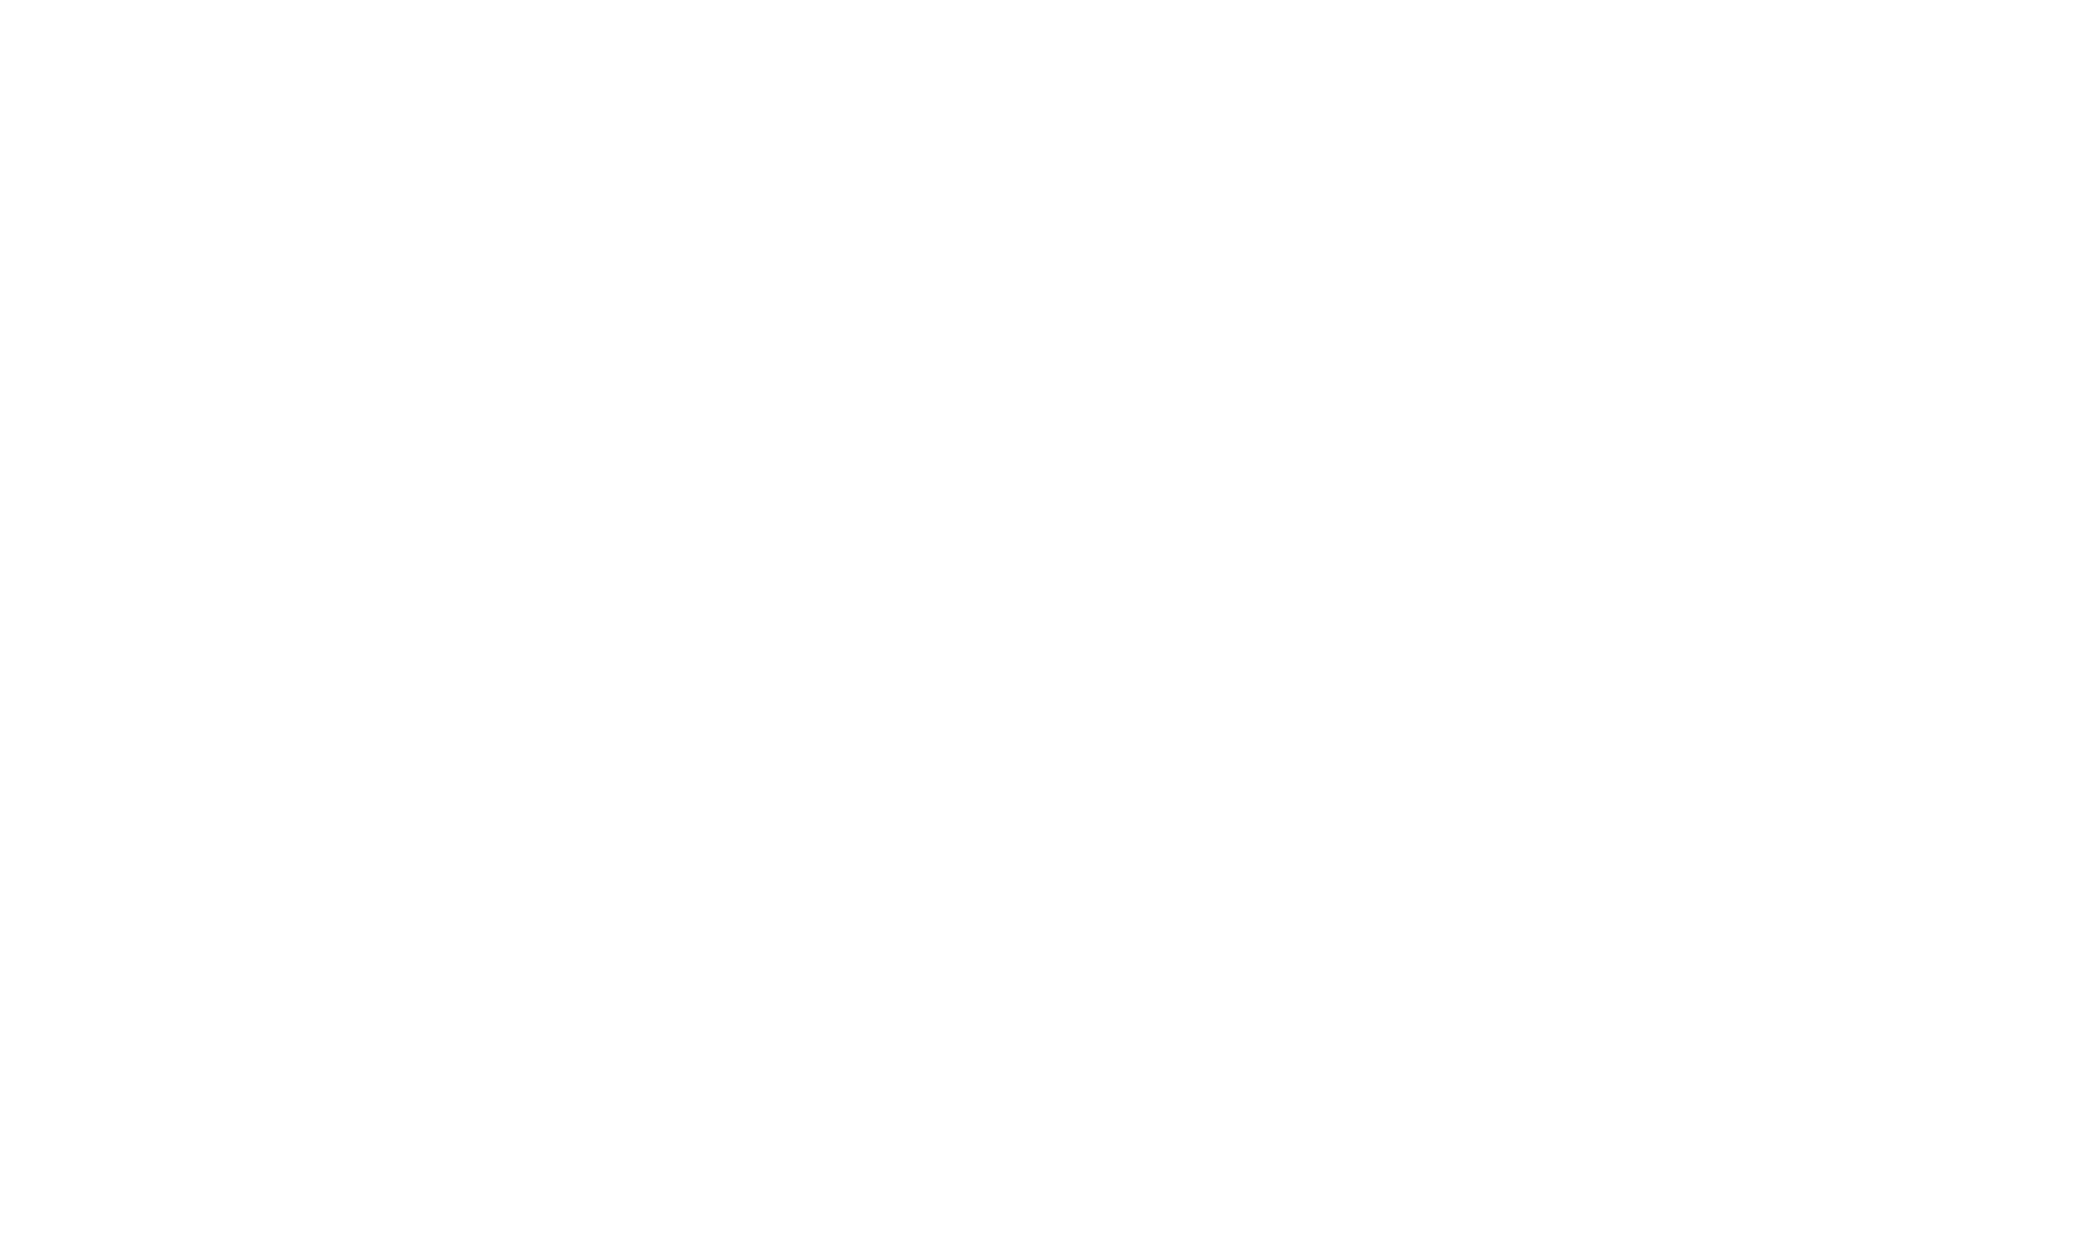 Value Capture Logo - Profound change. Sustainable Results.